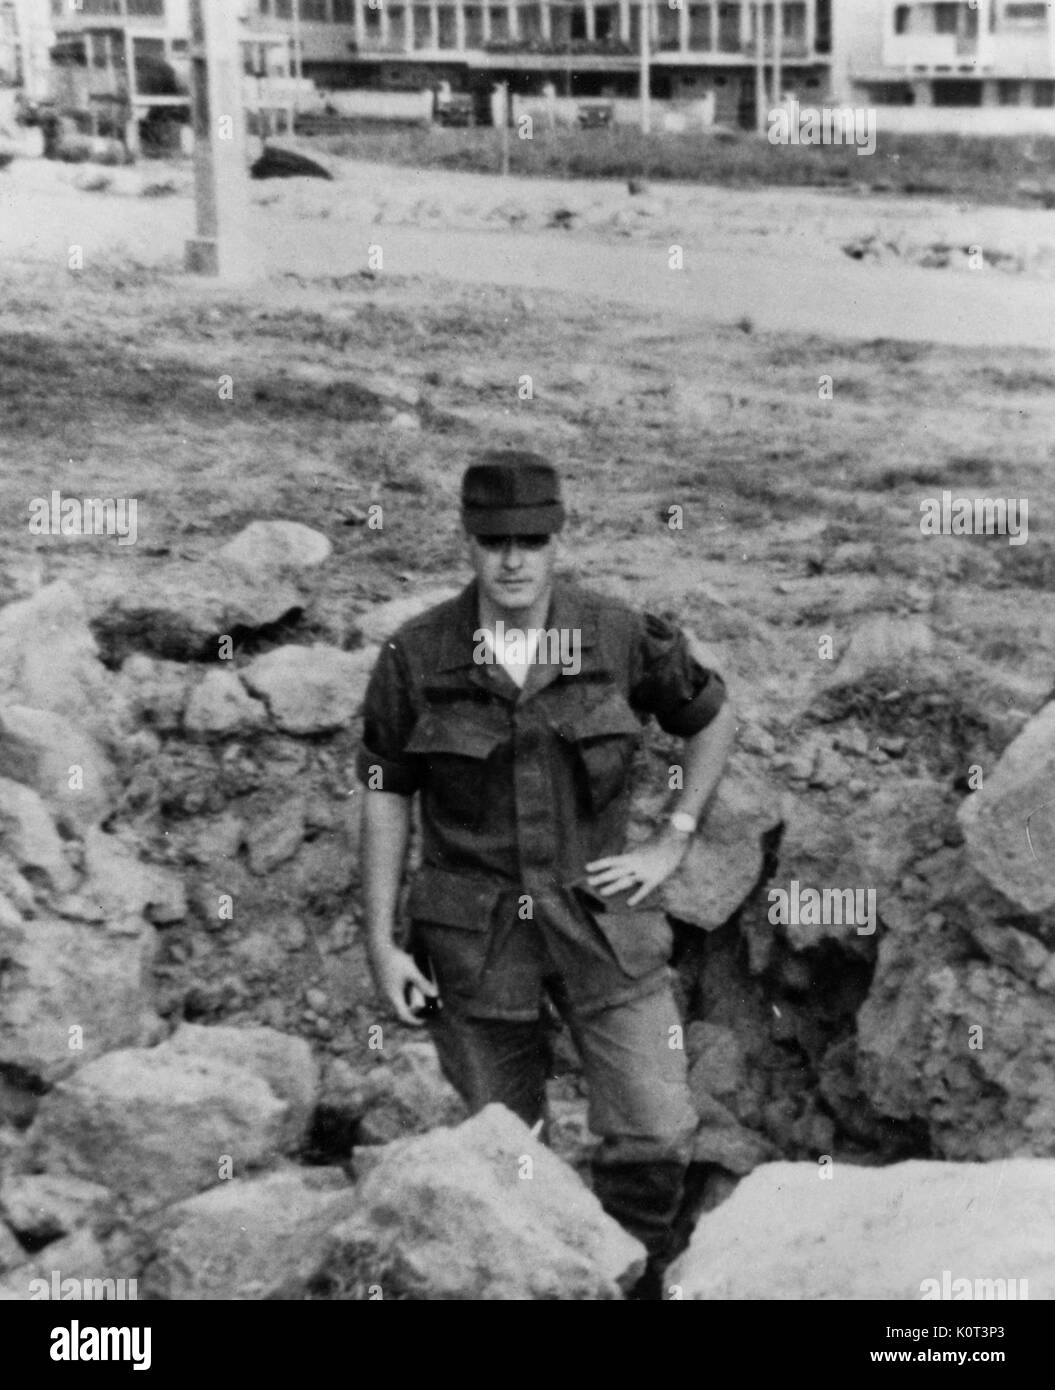 American Marine standing in a fox hole, wearing military uniform, with a cap obscuring his face, one hand on his hip, near a dirt road in Vietnam during the Vietnam War, 1965. Stock Photo